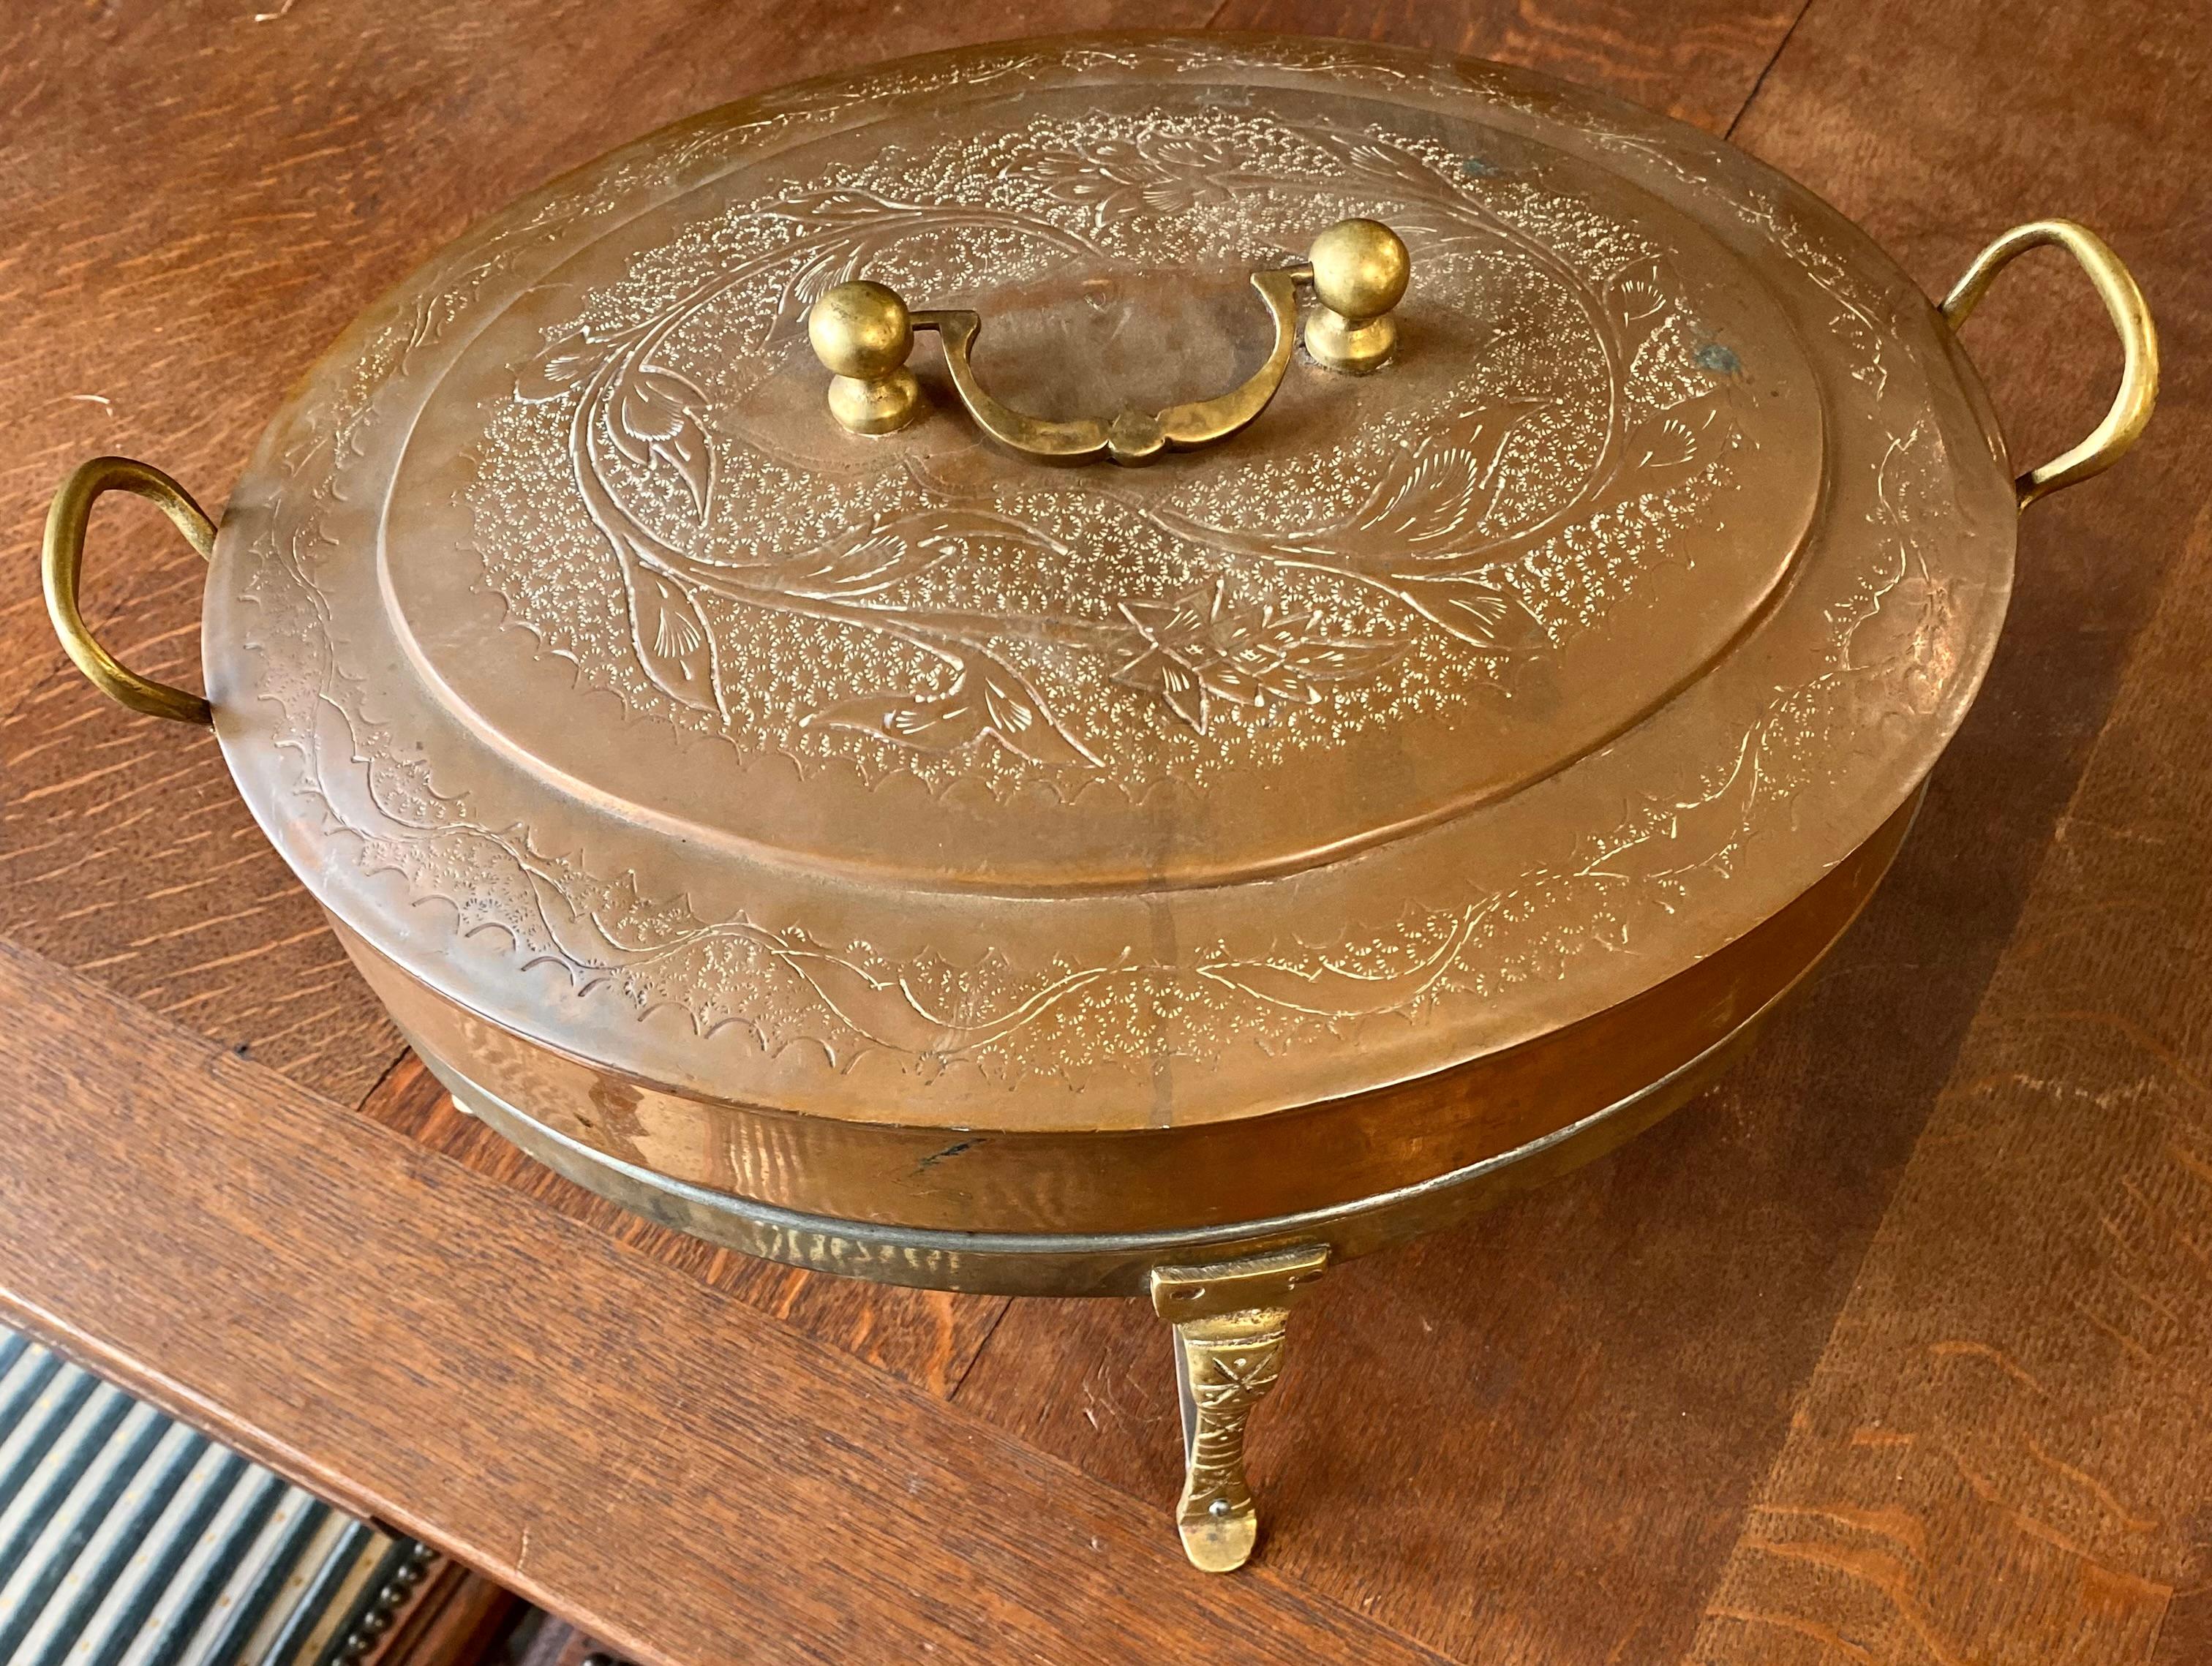 This vintage, large, oval beautifully engraved copper chaffing dish has solid brass handles on the sides and the top. There is a large cup for the sterno to sit in and the cabriole legs and feet are shaped nicely.
There is a large tin lined area for